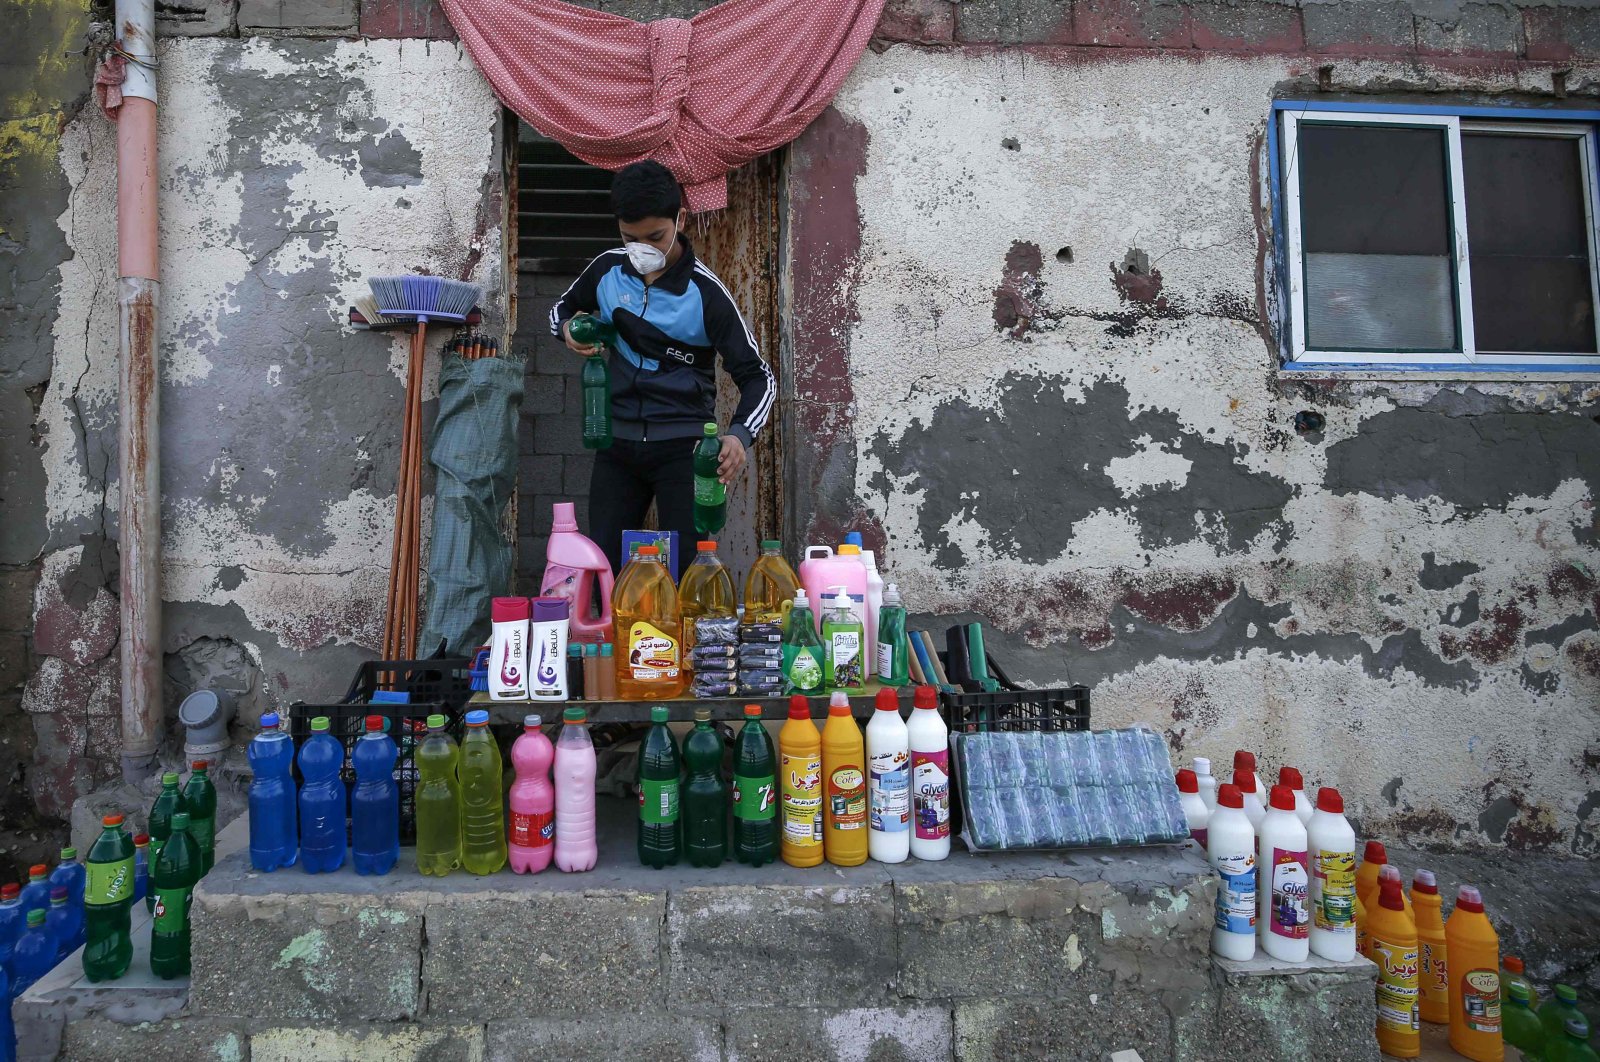 A Palestinian boy wearing a protective mask sets cleaning tools and disinfectants for sale in front of his home in al-Shati refugee camp, Thursday, March 26, 2020. (AFP Photo)